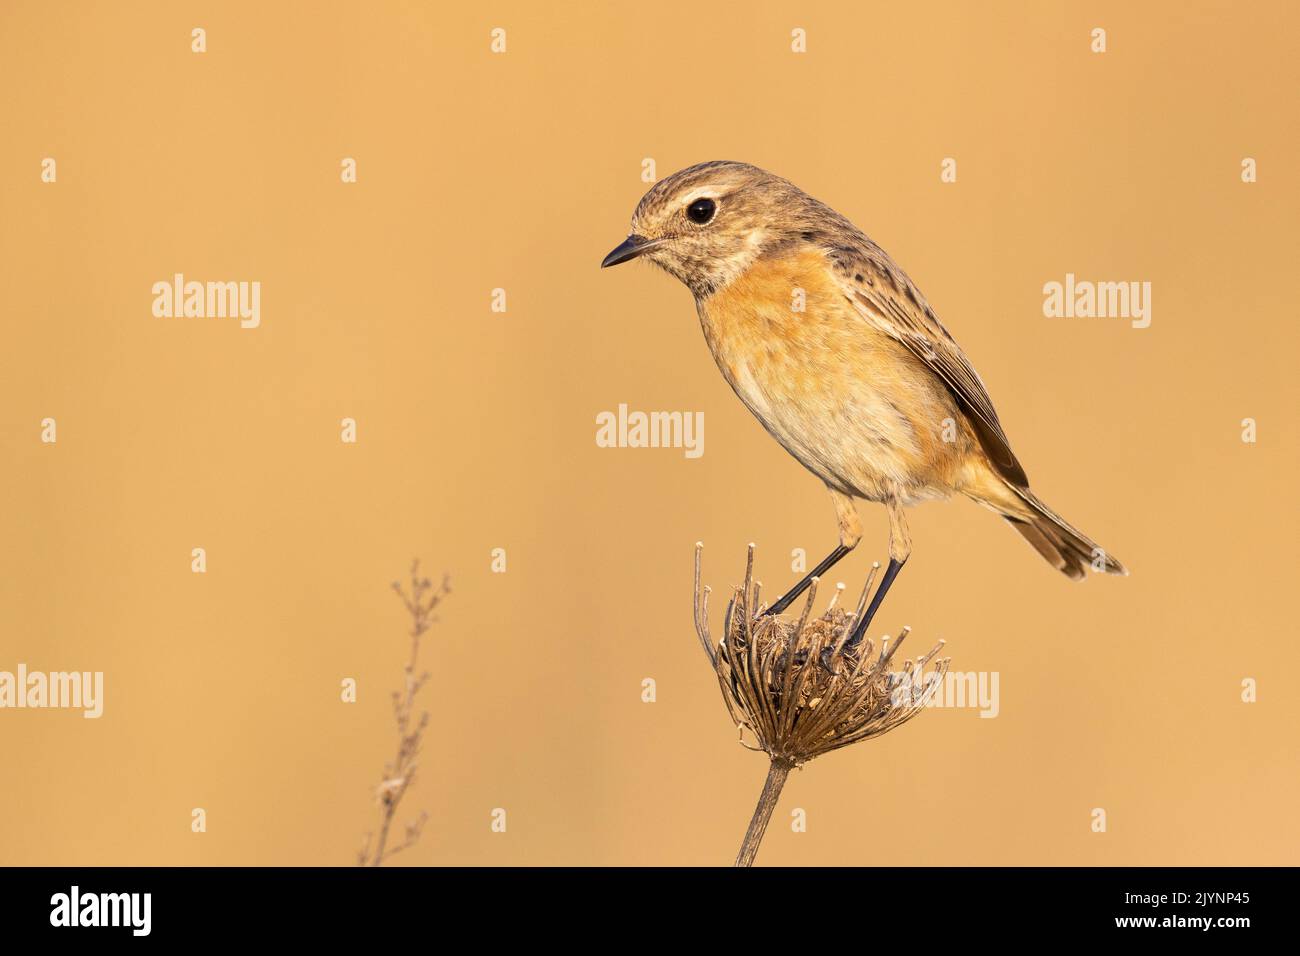 European Stonechat (Saxicola rubicola), side view of an adult female standing on a stem, Campania, Italy Stock Photo